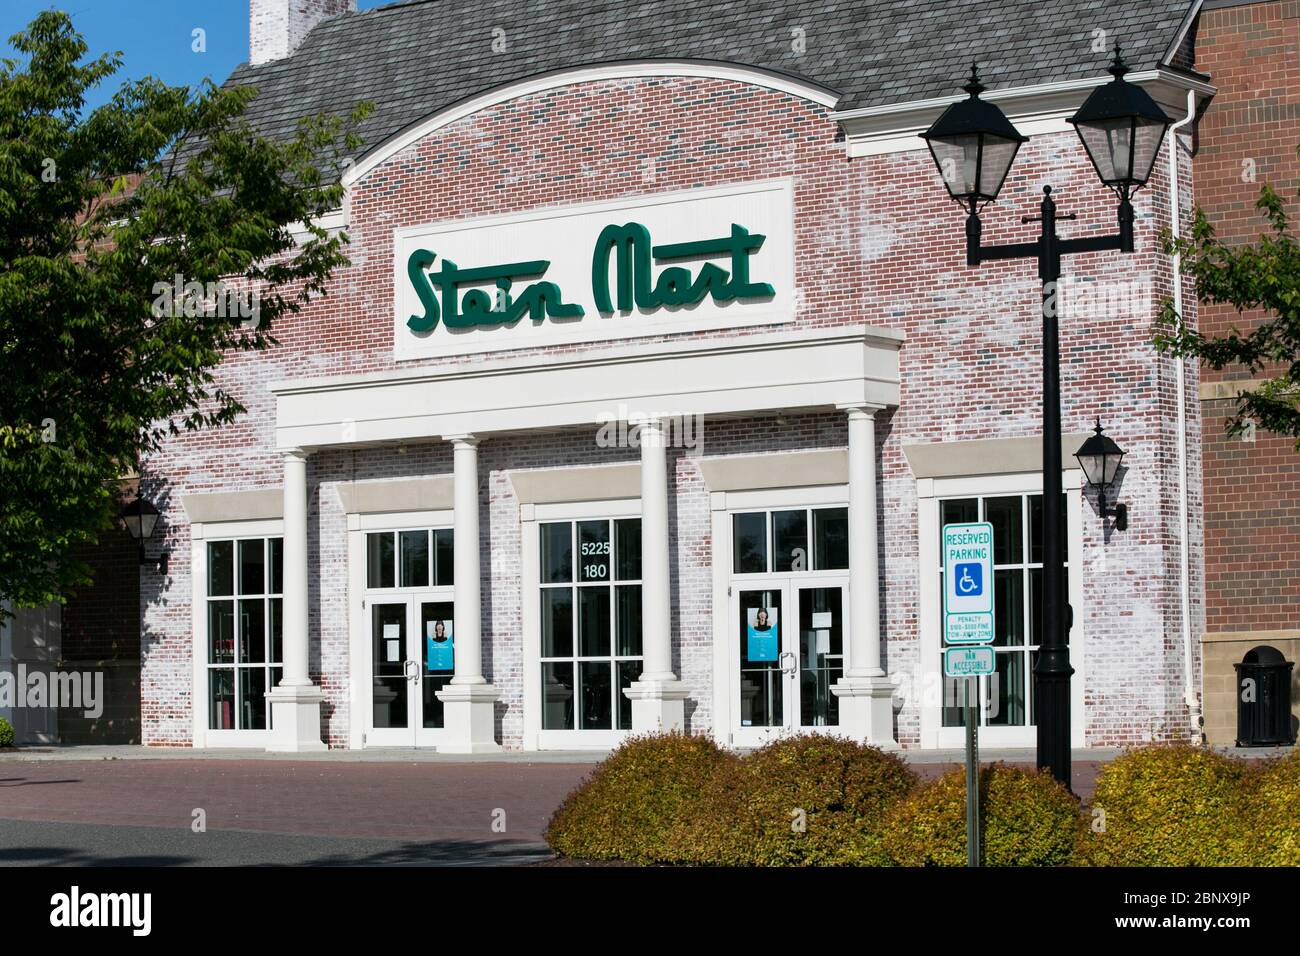 Stein Mart Is Coming to Cupertino - Racked SF